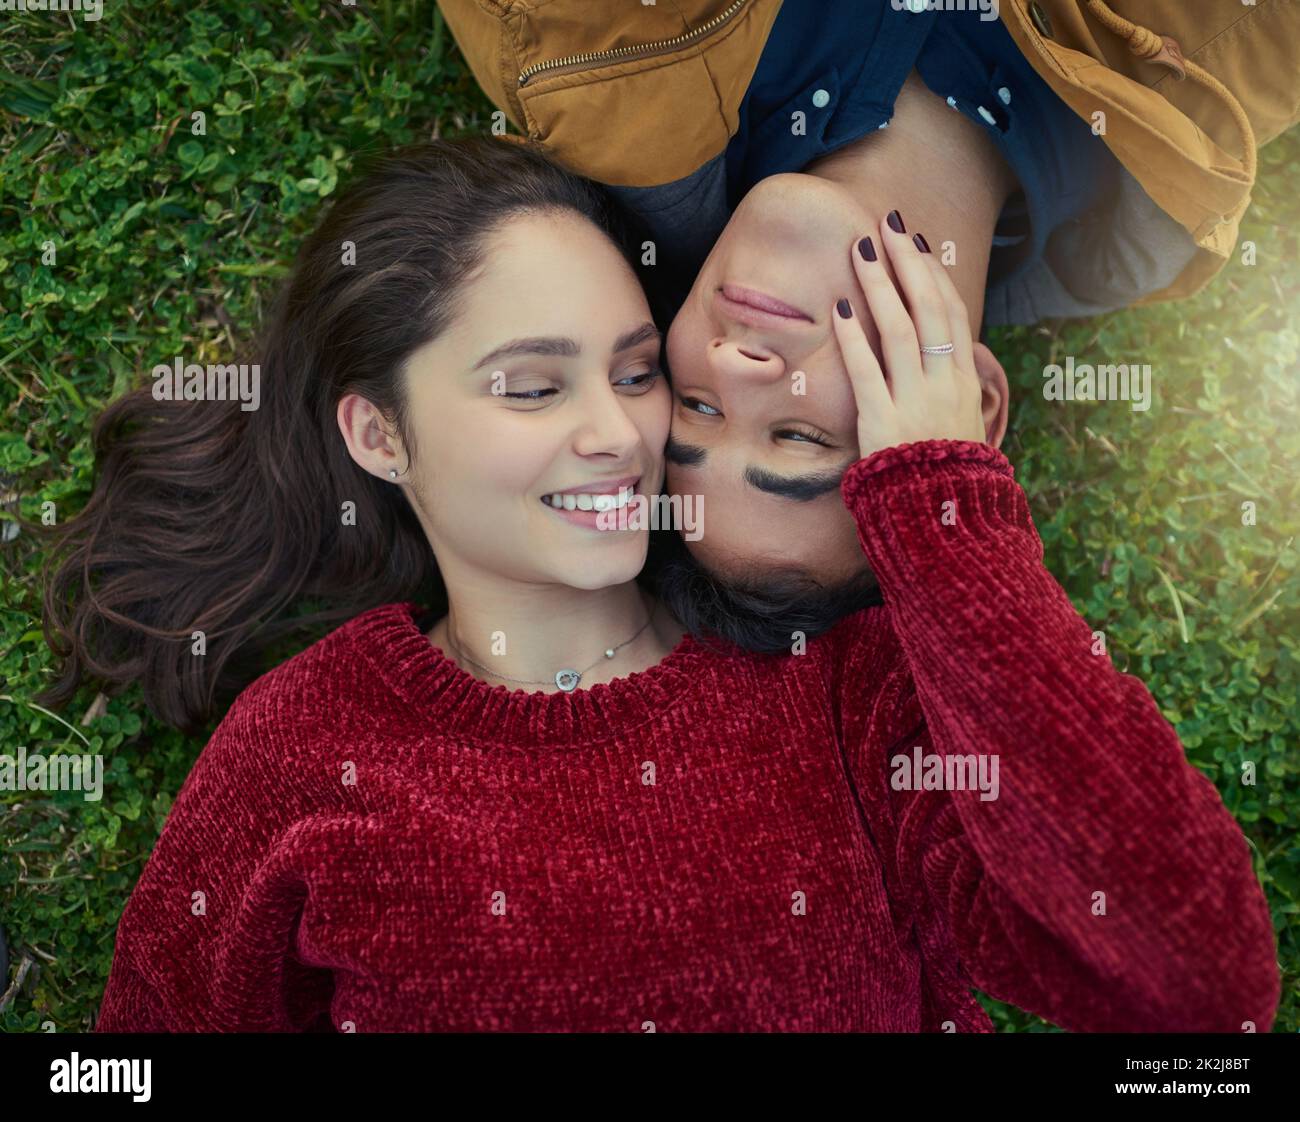 With you next to me, life is complete. High angle shot of a happy young couple laying together on the grass. Stock Photo